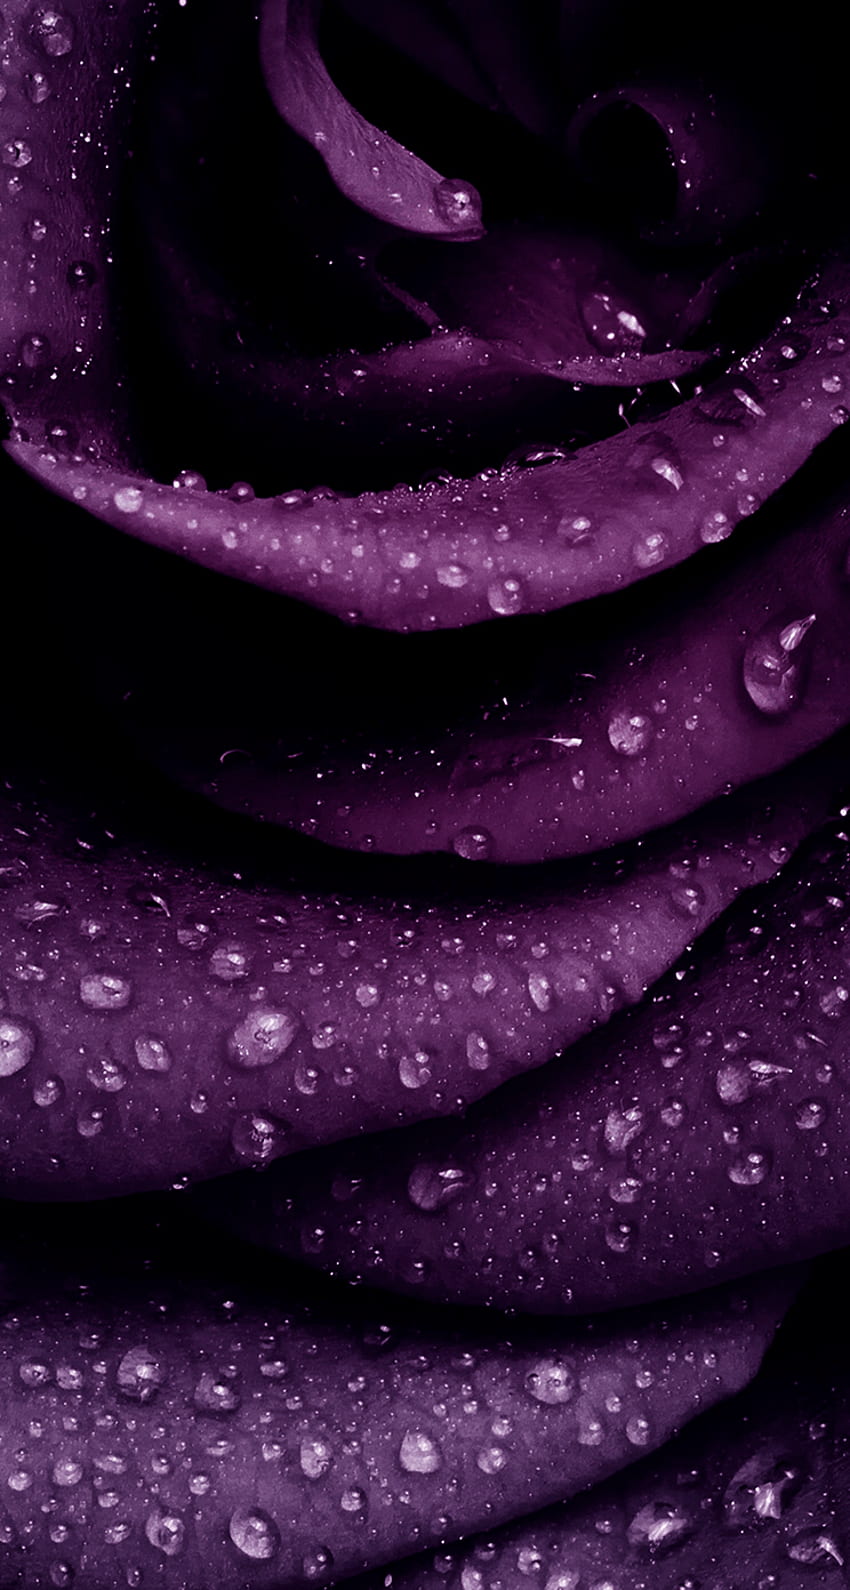 IPHONE WALLPAPER PURPLE ABSTRACT